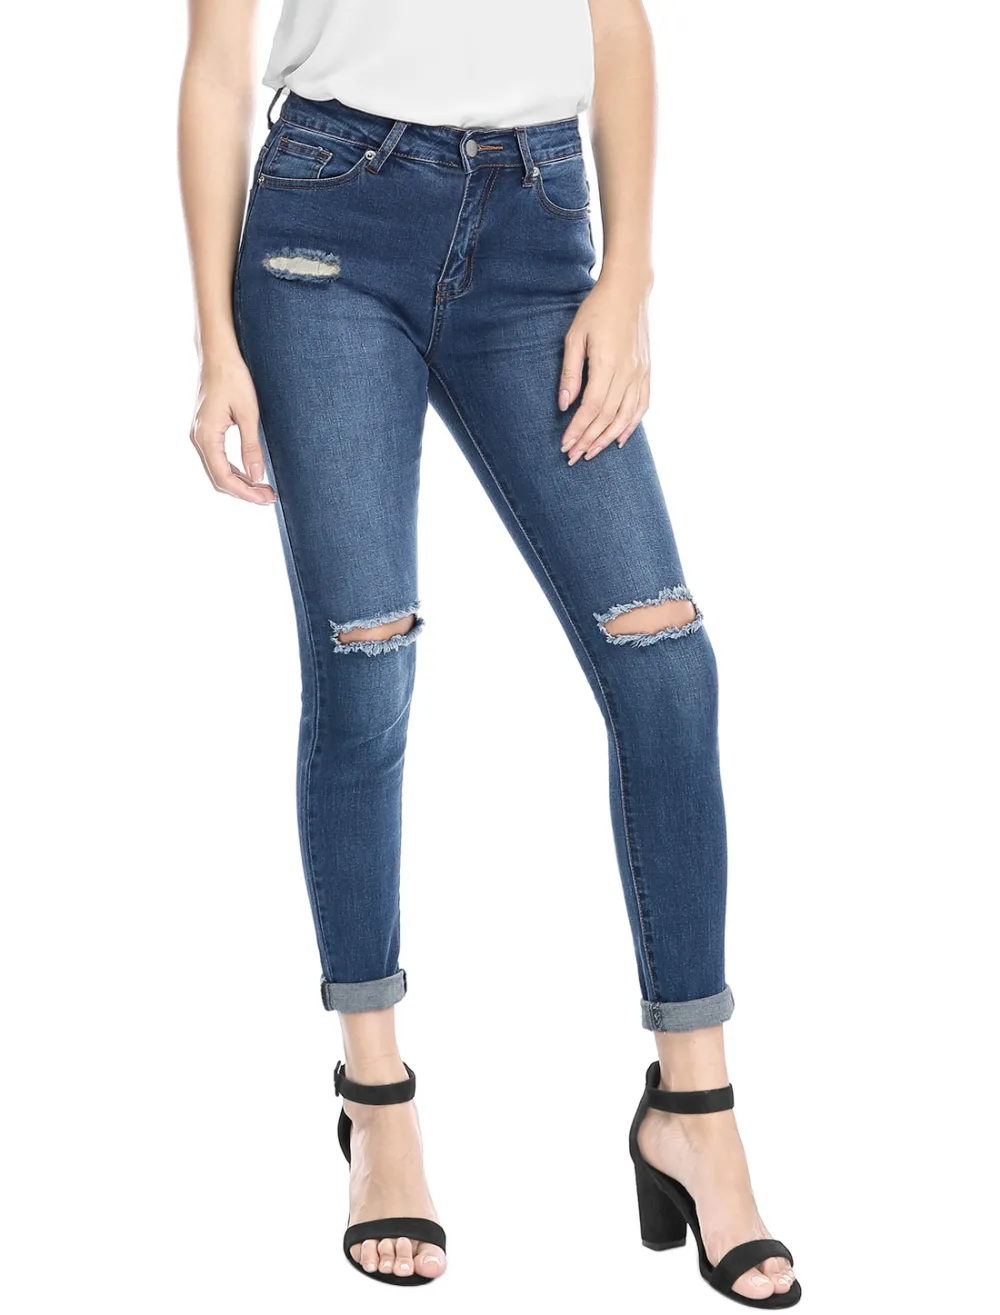 Allegra K - Stretchy Mid Rise Ripped Ankle Skinny Jeans